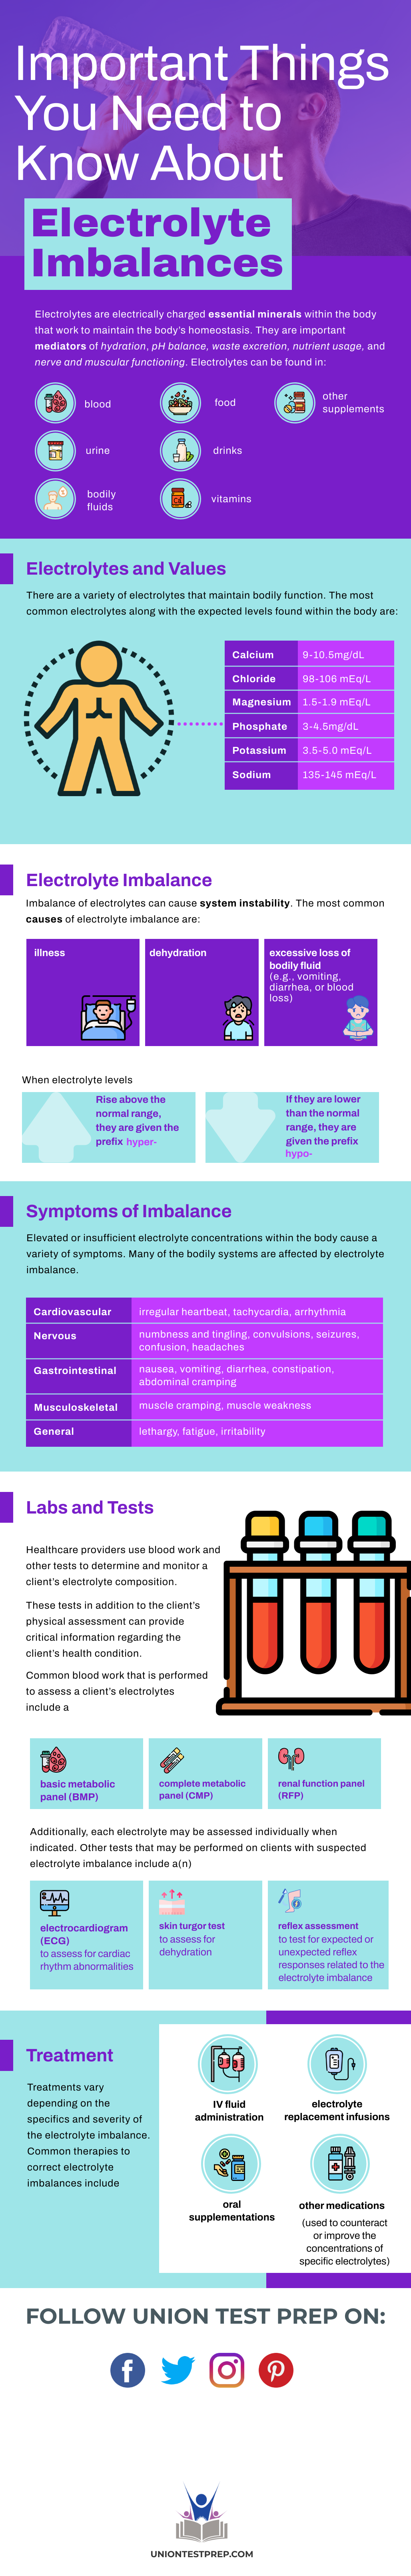 Important Things to Know About Electrolyte Imbalances